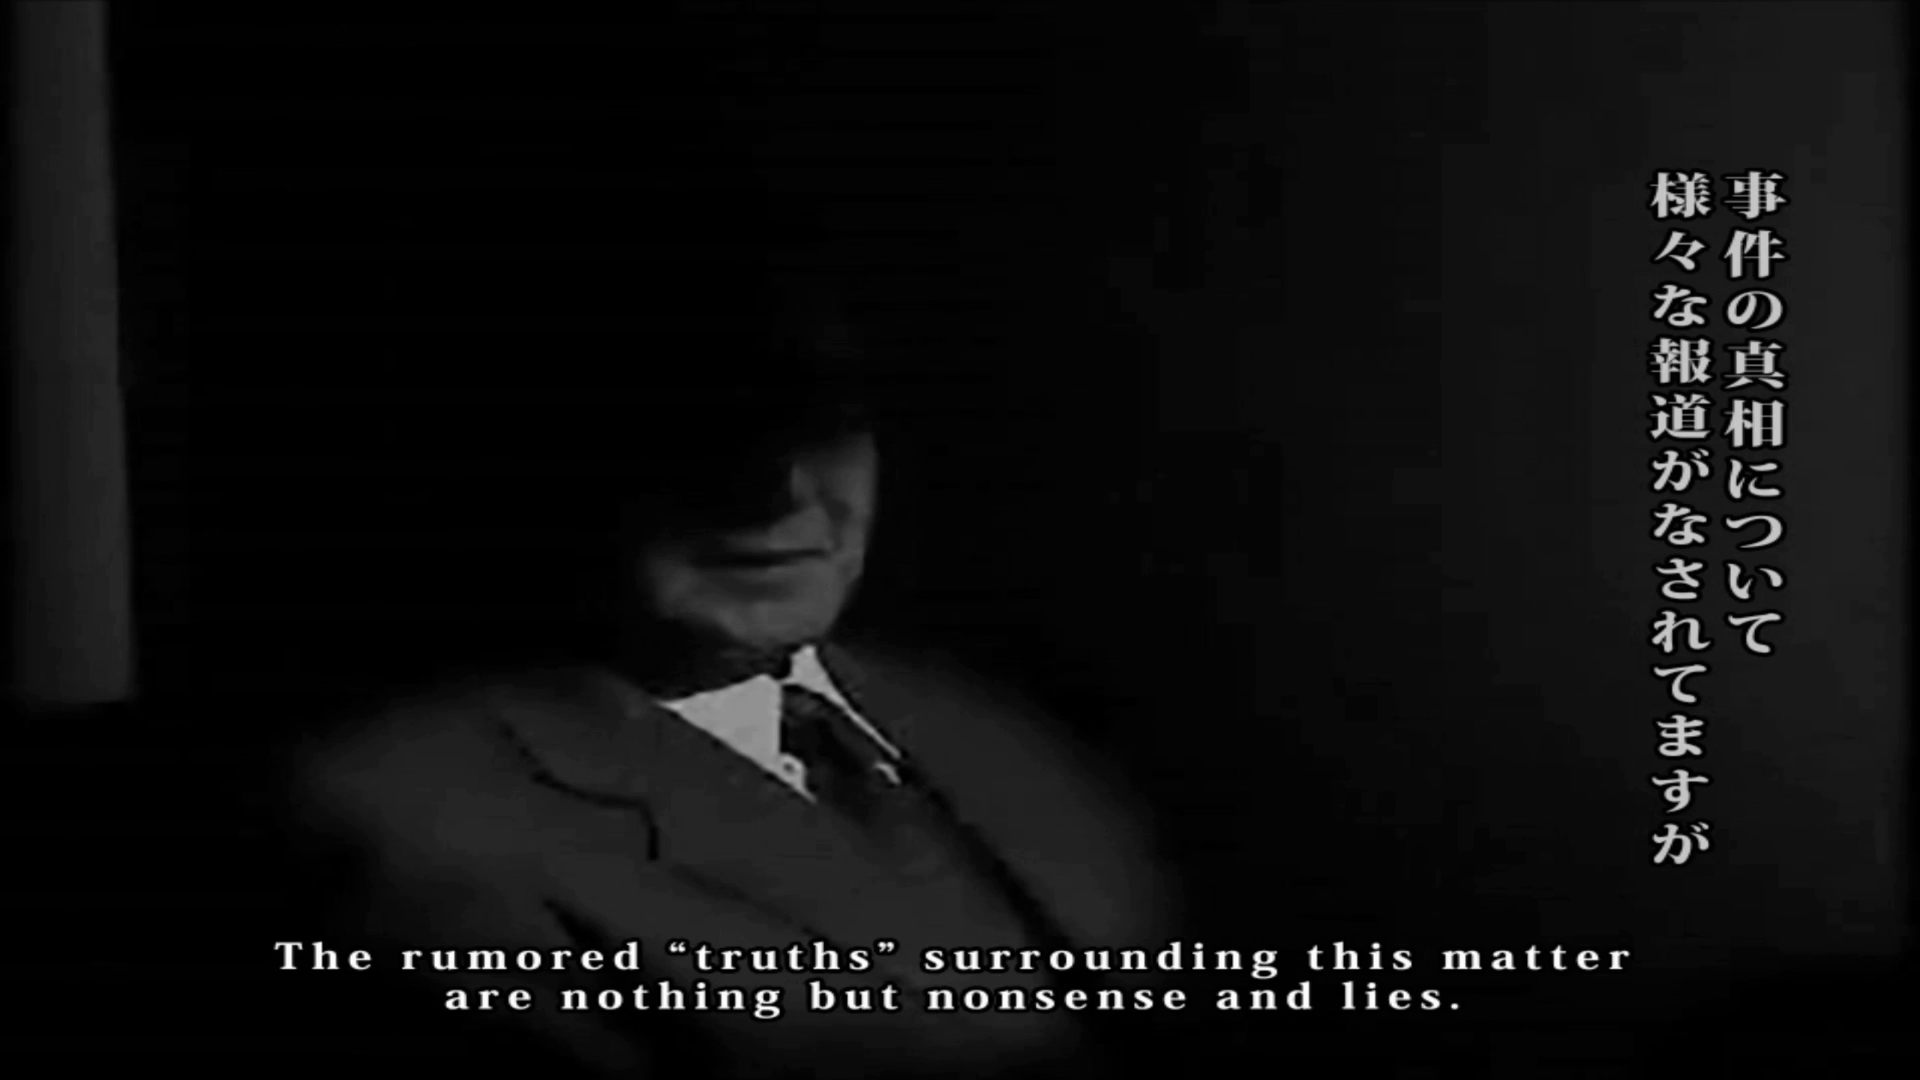 Screenshot from "LifeCut." In a still of a black-and-white video, an old man in a suit, his face hidden in darkness, talks. The subtitles read, "The rumored 'truths' surrounding this matter are nothing but nonsense and lies." Text along the right side of the screen reads, "様々な報道がなされたますが　事件の真について," which means, "Various reports have been made concerning the truth of the case"